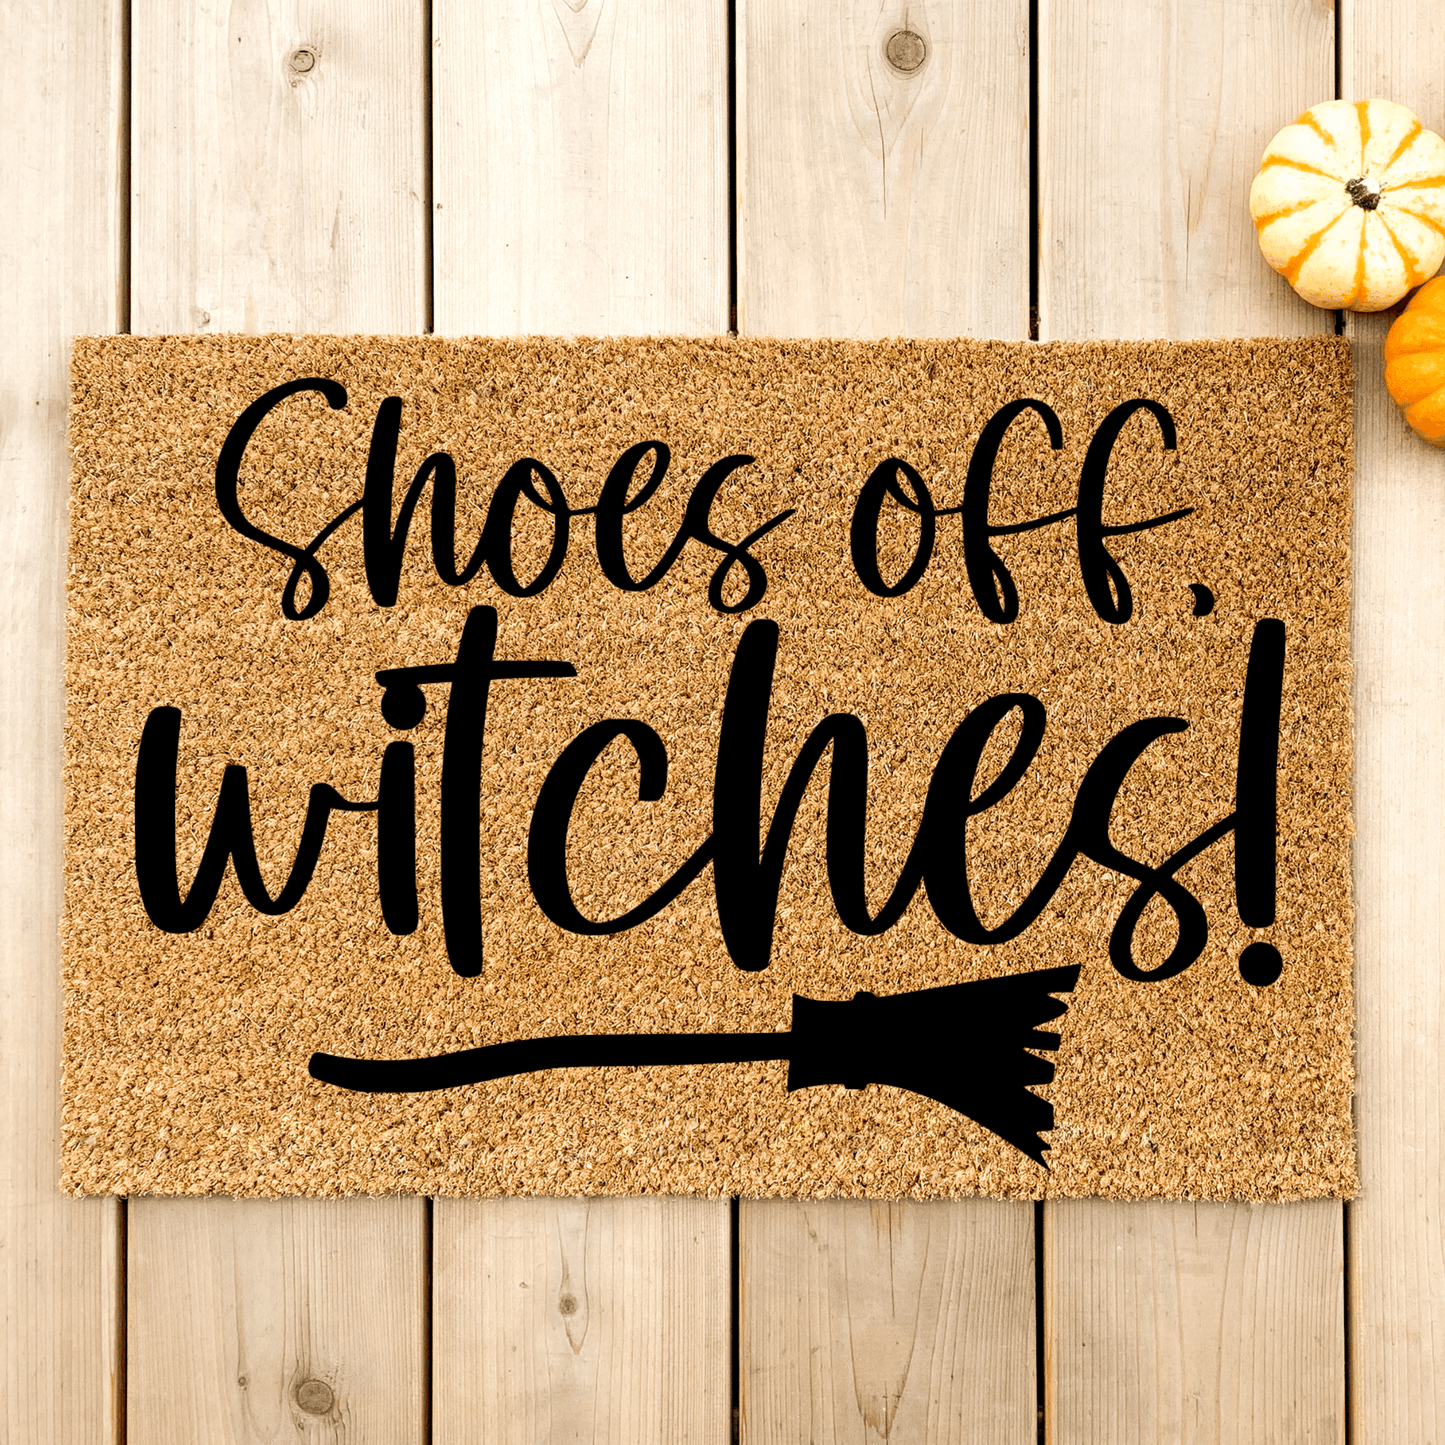 shoes off witches